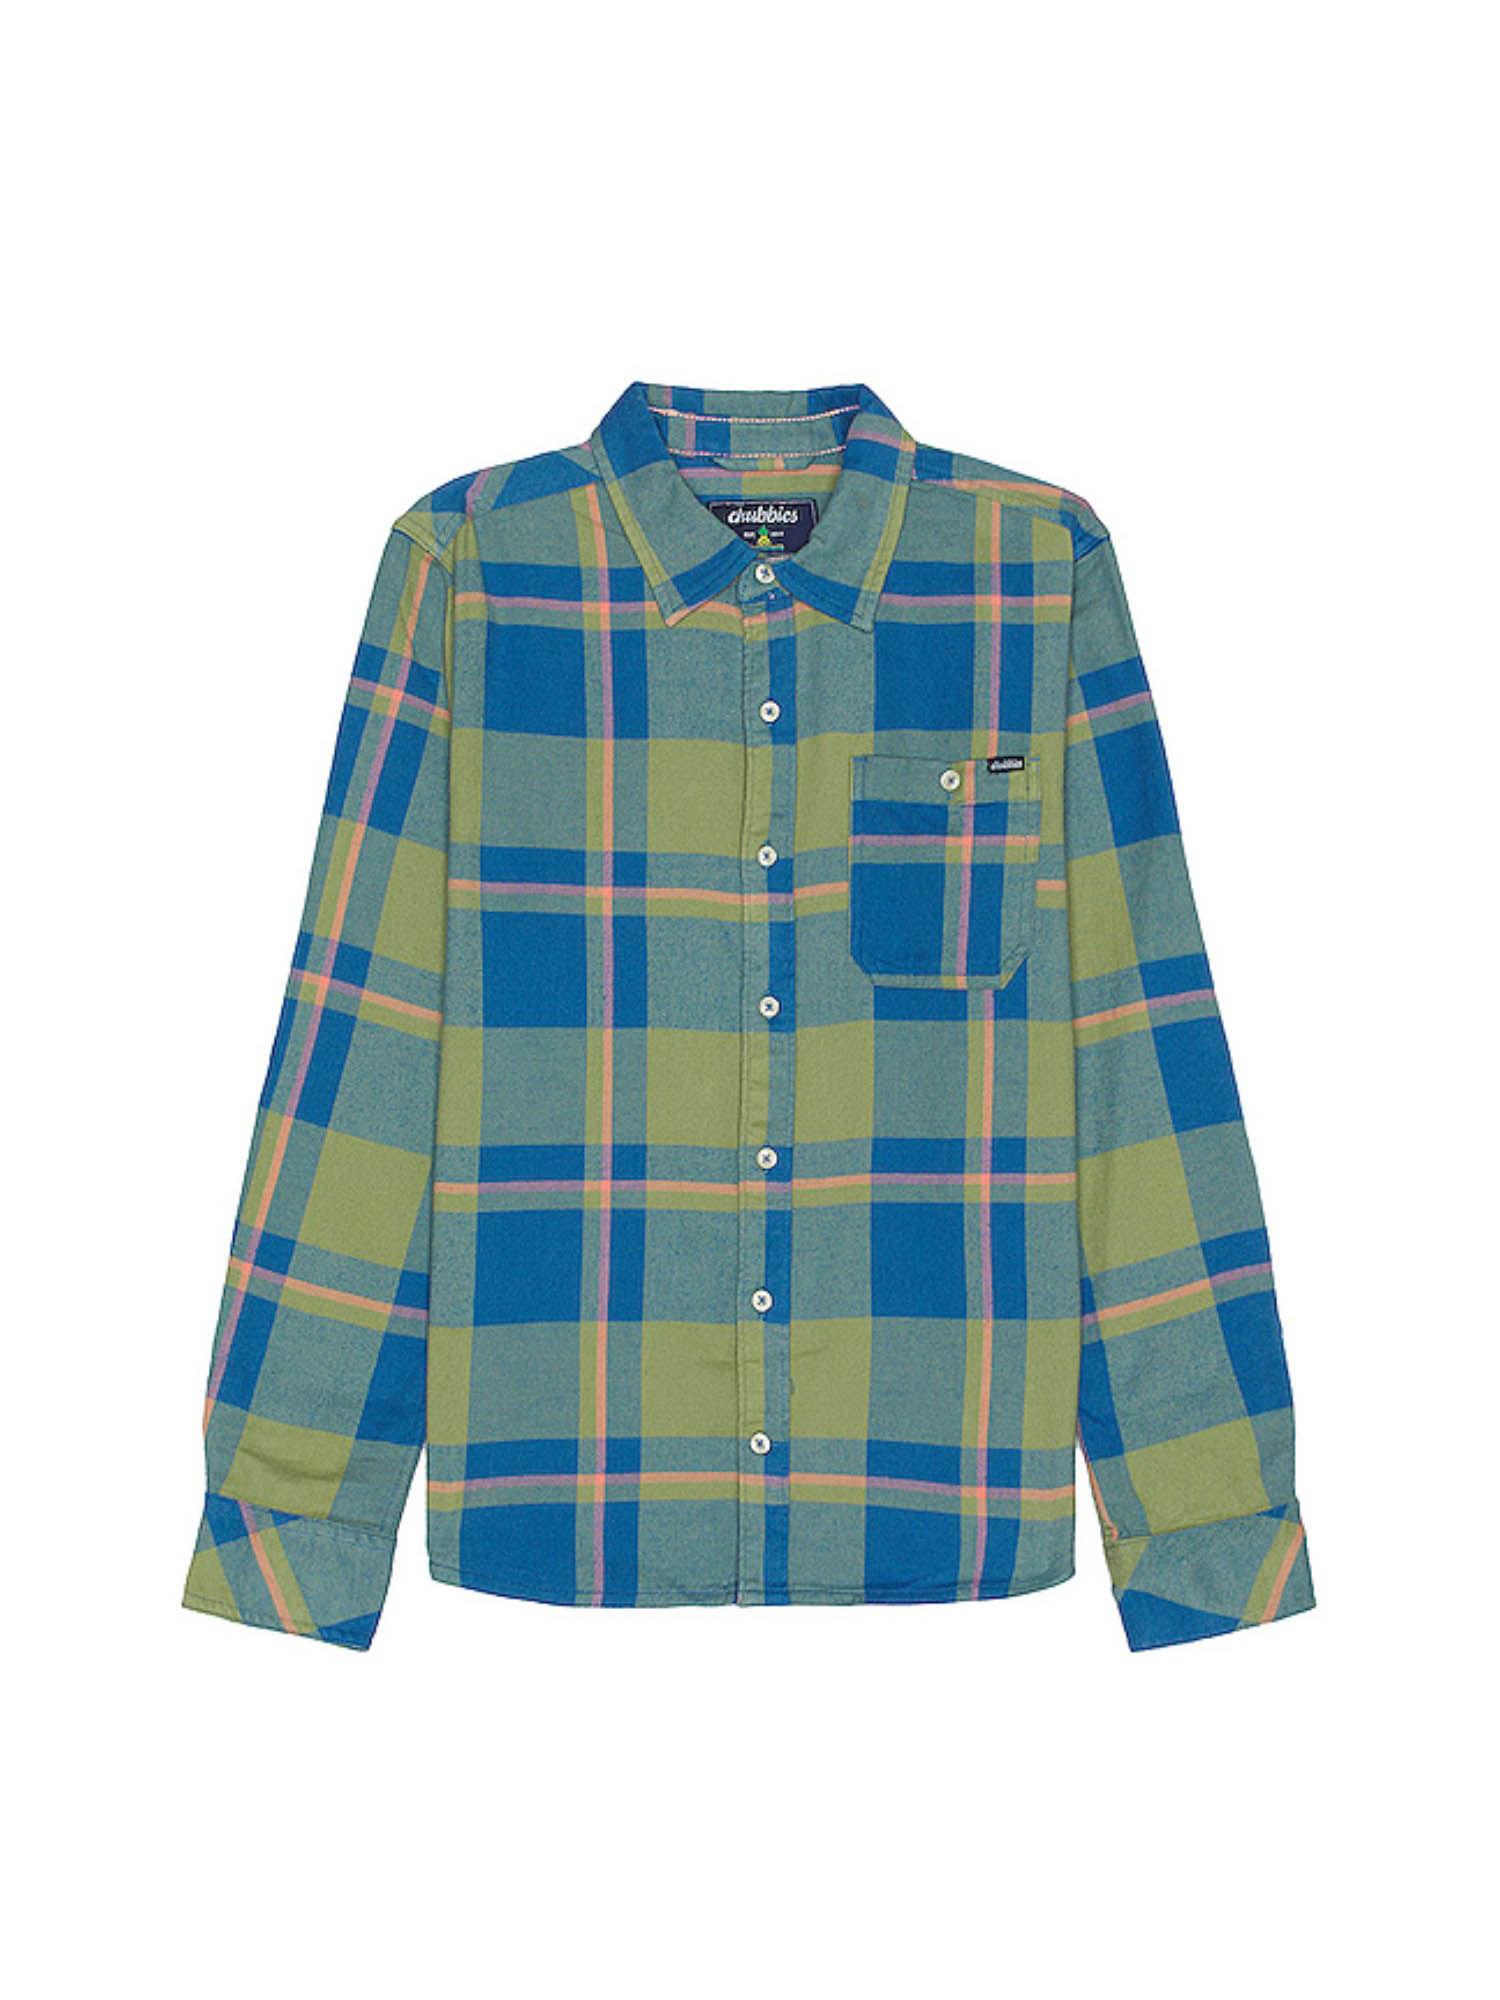 the be glad wear plaid flannel shirt